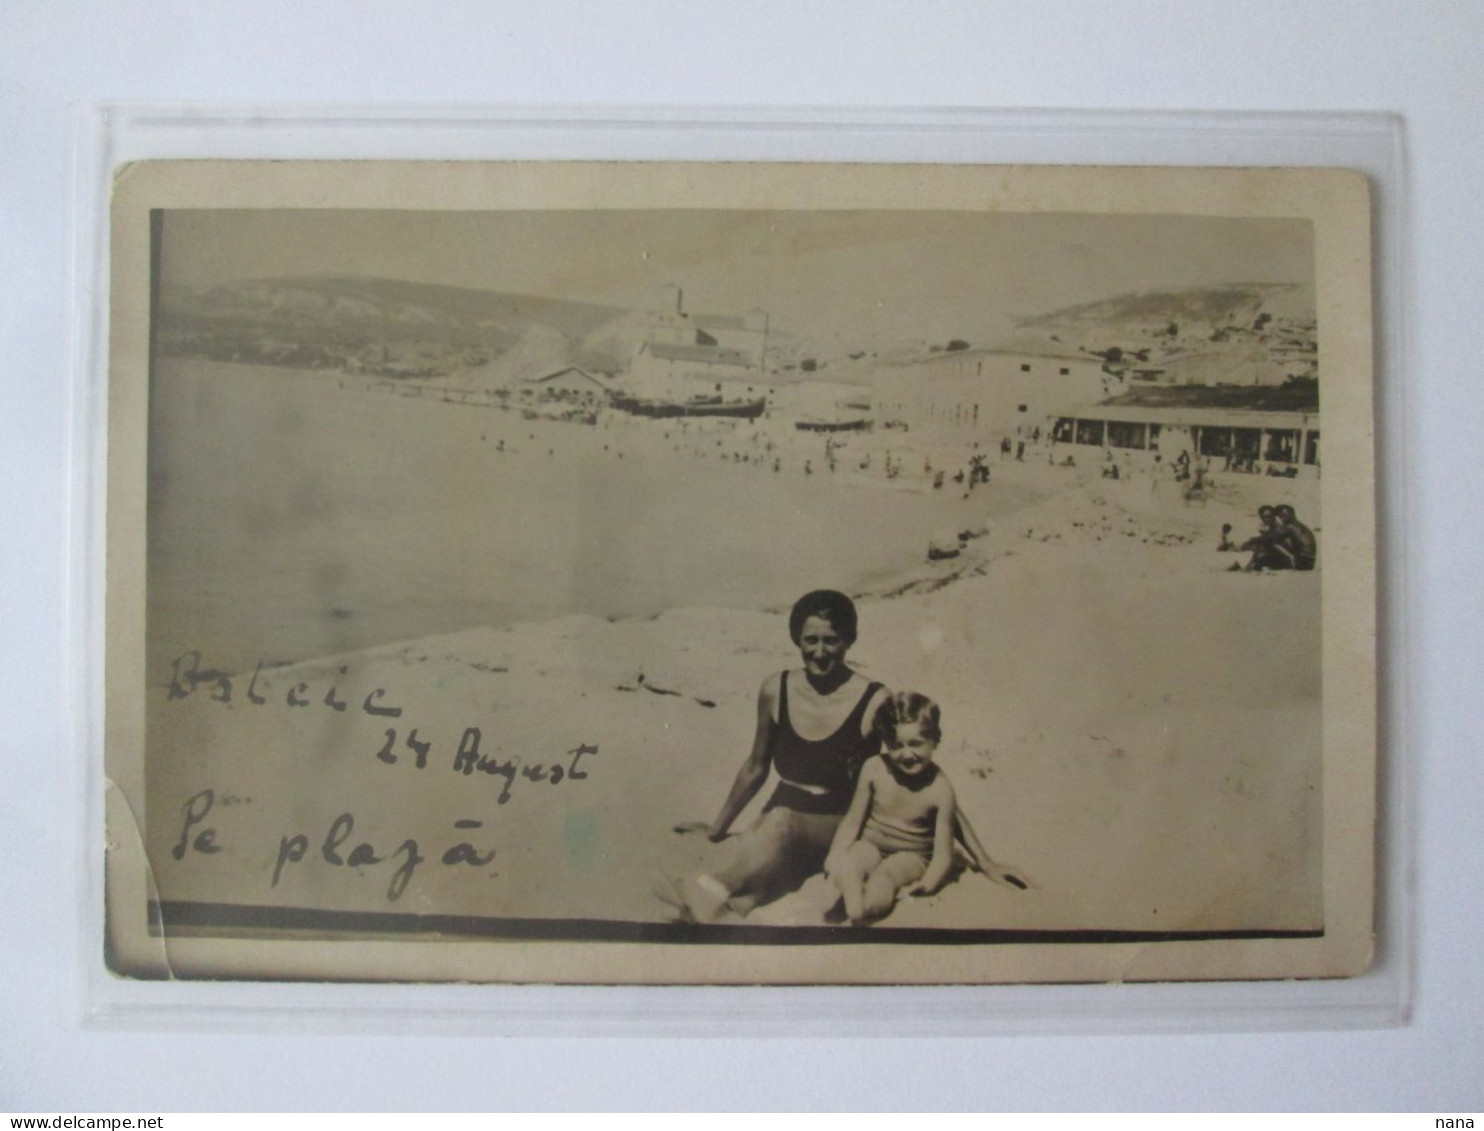 Bulgaria Former Romania-Balcic:Photo Postcard On The Beach From The 30s,see Pictures - Bulgaria